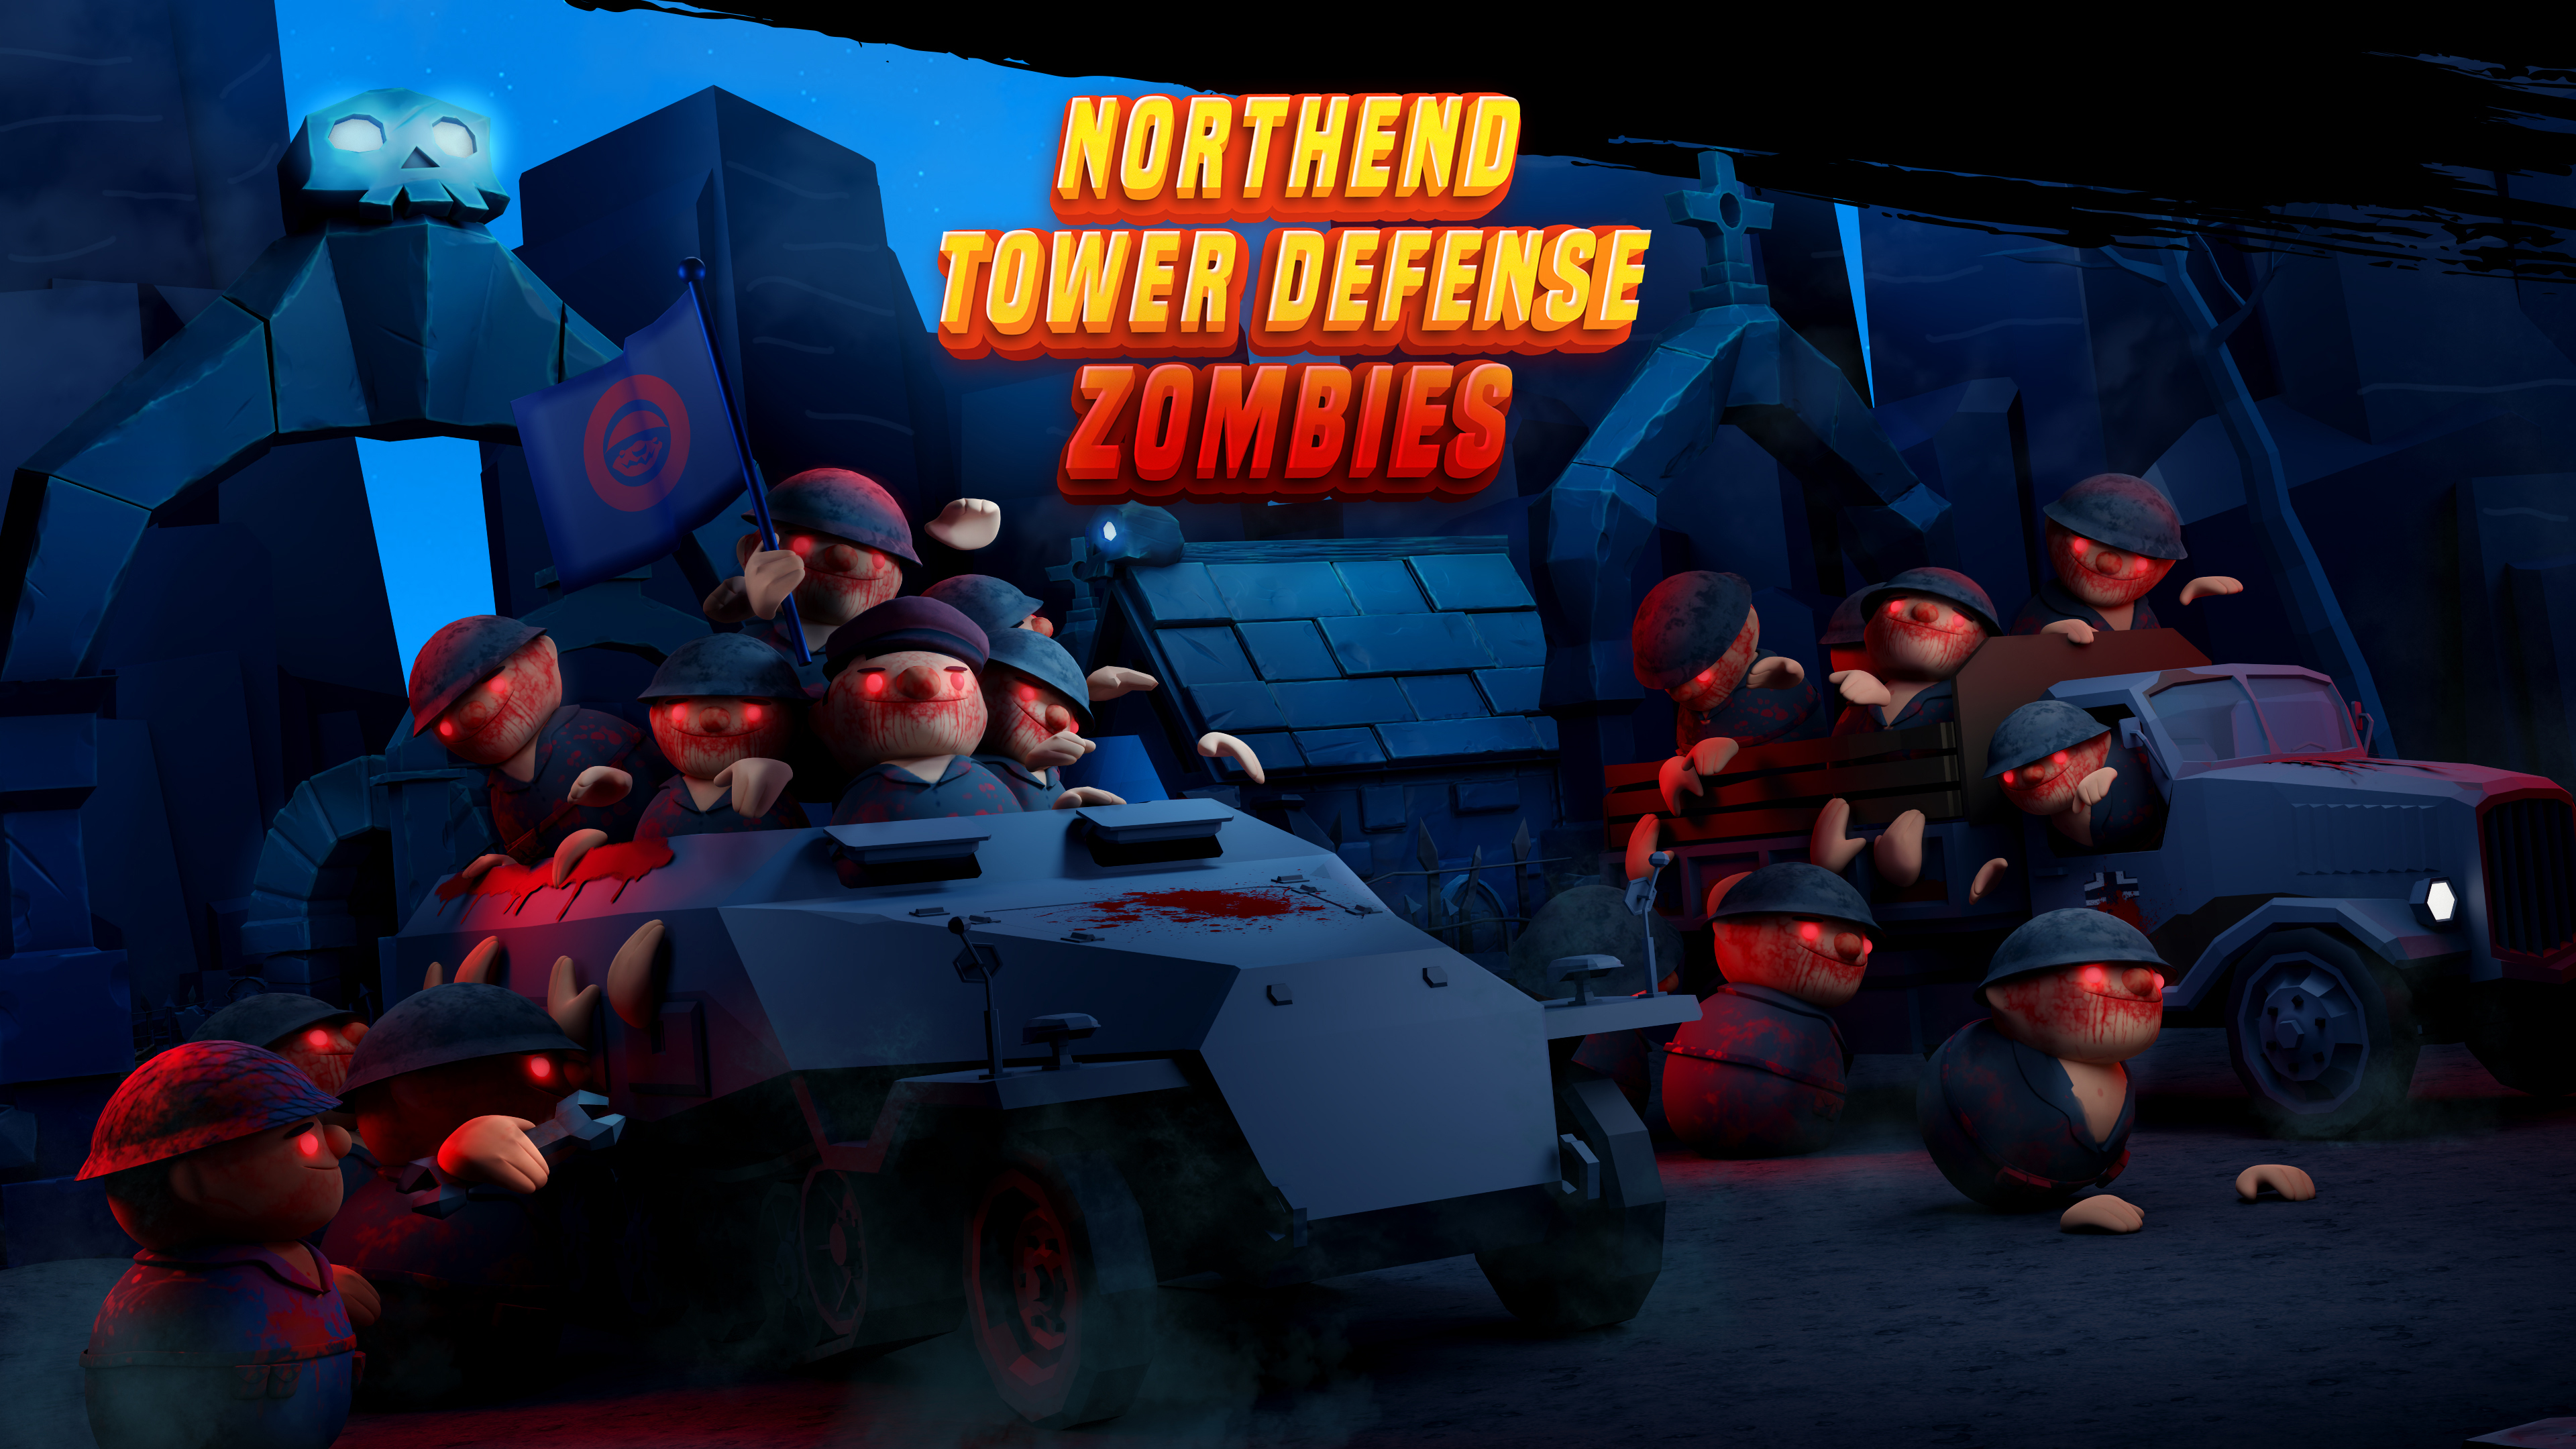 Game - Tower Defense, Upgrades and Zombies!